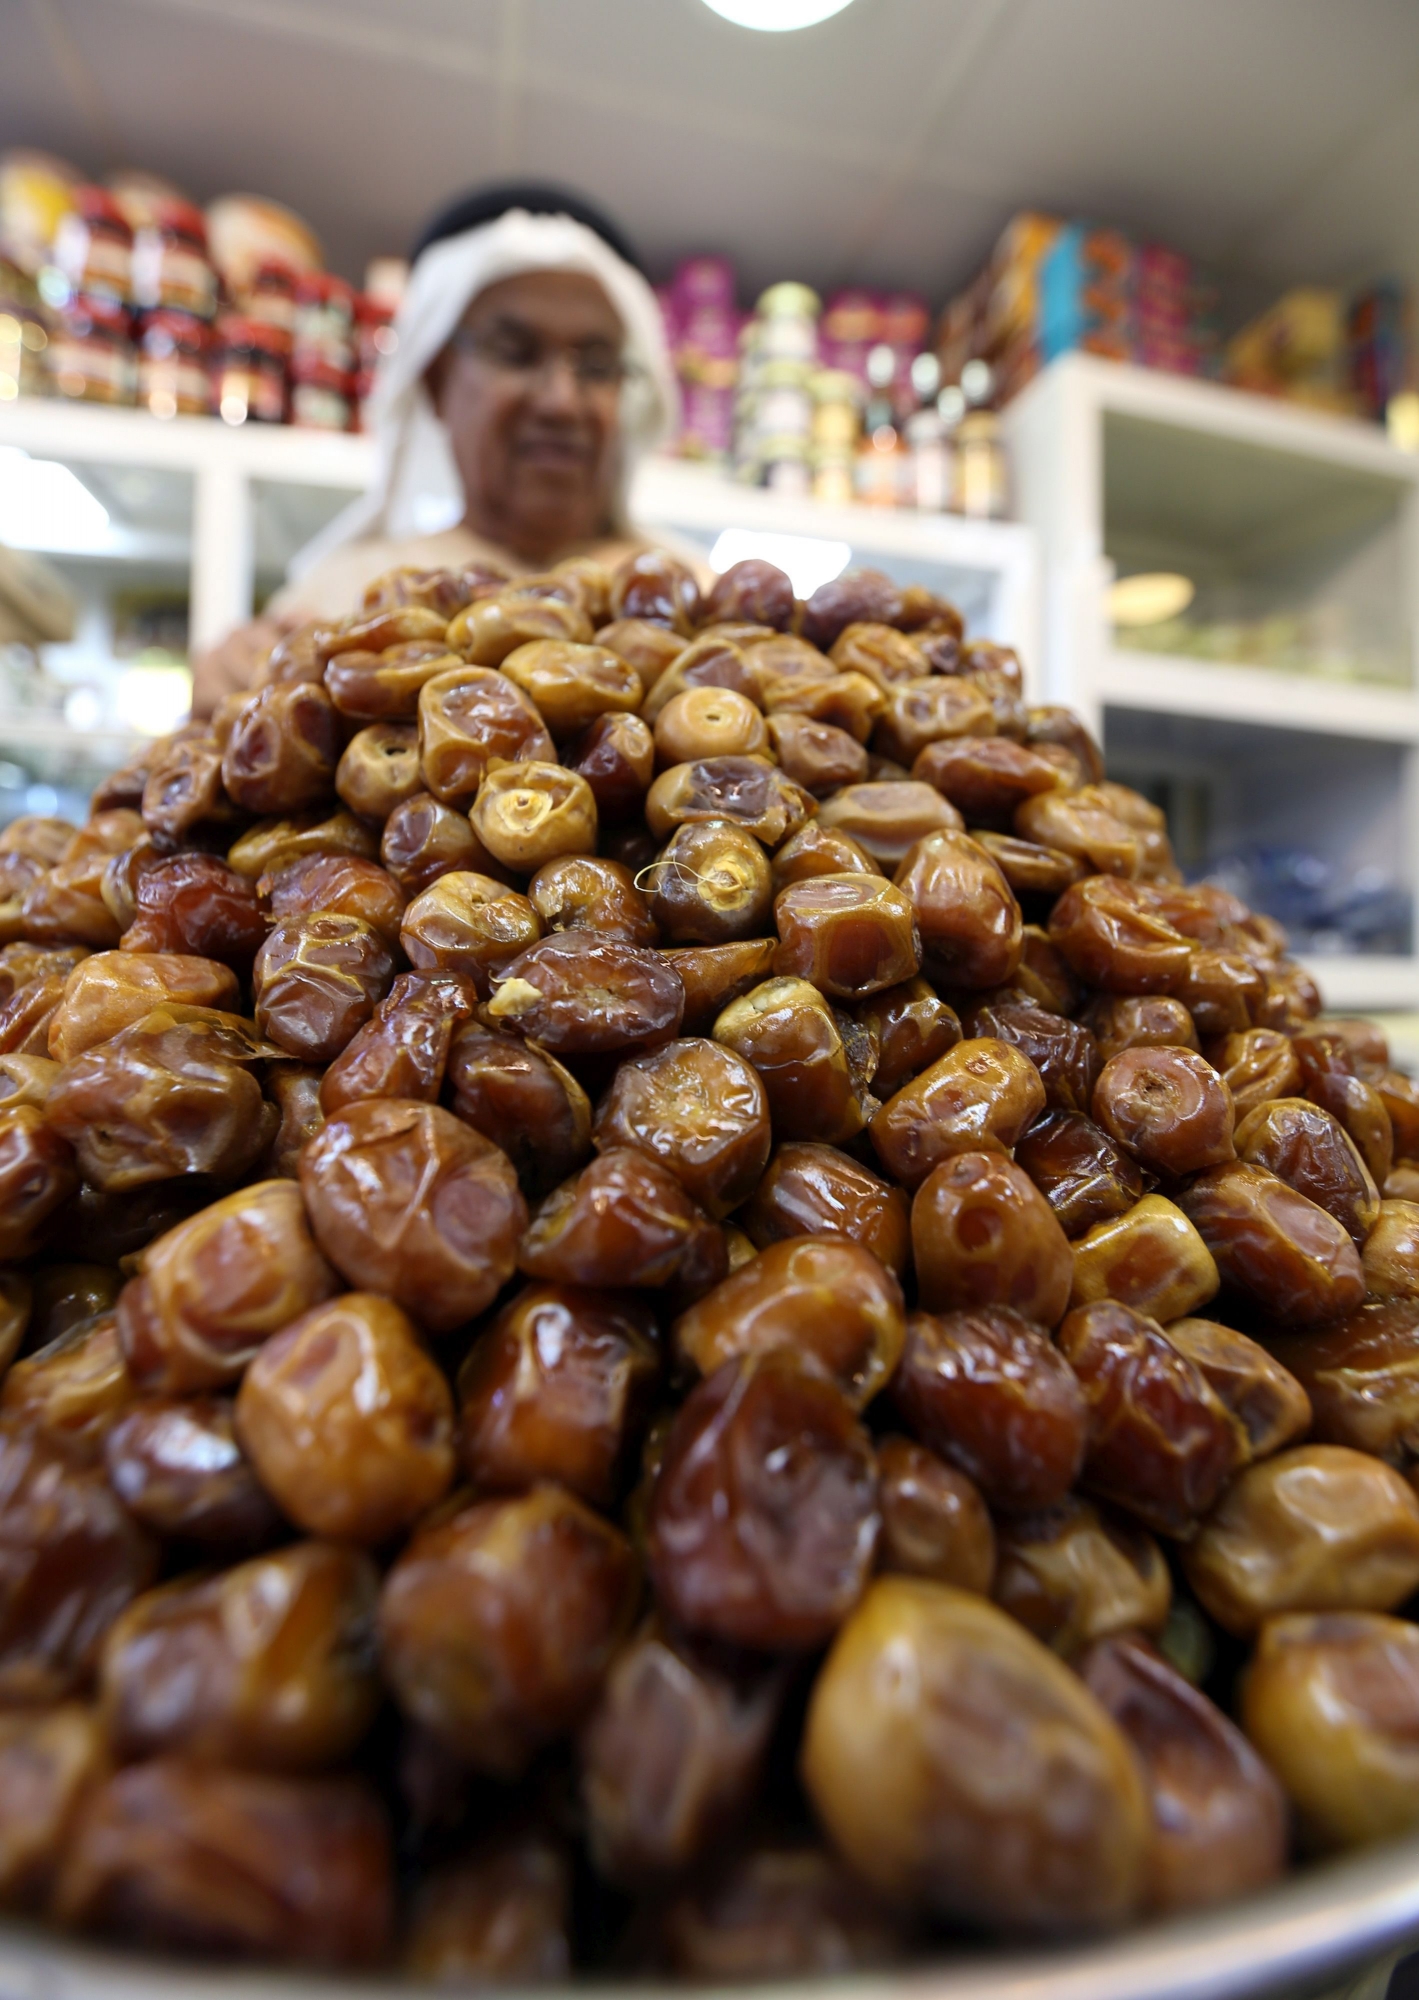 epa06738635 A shopper at a popular vegetables market selects dates, an important Ramadan staple, before the starting of the Islamic holy month of Ramadan, Abu Dhabi, United Arab Emirates, 15 May 2018. Muslims are shopping for food and sweets as part of their preparations for one of the most important dates in the Islamic calendar, Ramadan, expected to start 17 May. Muslims around the world celebrate the holy month of Ramadan by praying during the night time and abstaining from eating, drinking, and sexual acts during the period between sunrise and sunset. Ramadan is the ninth month in the Islamic calendar and it is believed that the revelation of the first verse in Koran was during its last 10 nights.  EPA/ALI HAIDER UAE RAMADAN ISLAM BELIEF